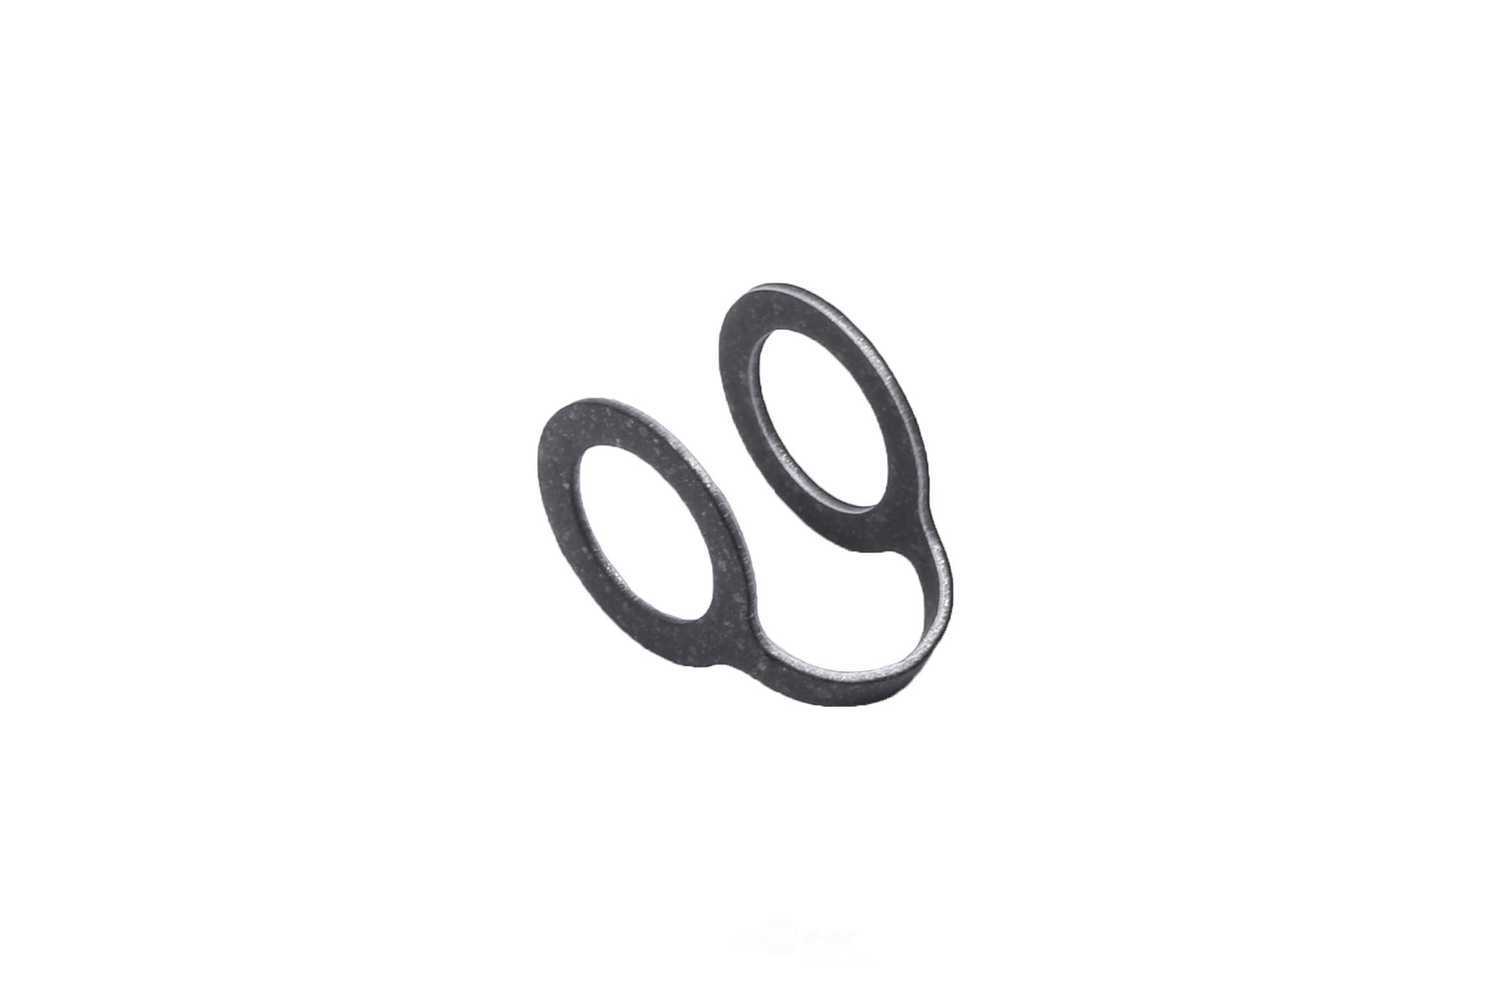 GM GENUINE PARTS - Turbocharger Oil Supply Line Gasket - GMP 12633903